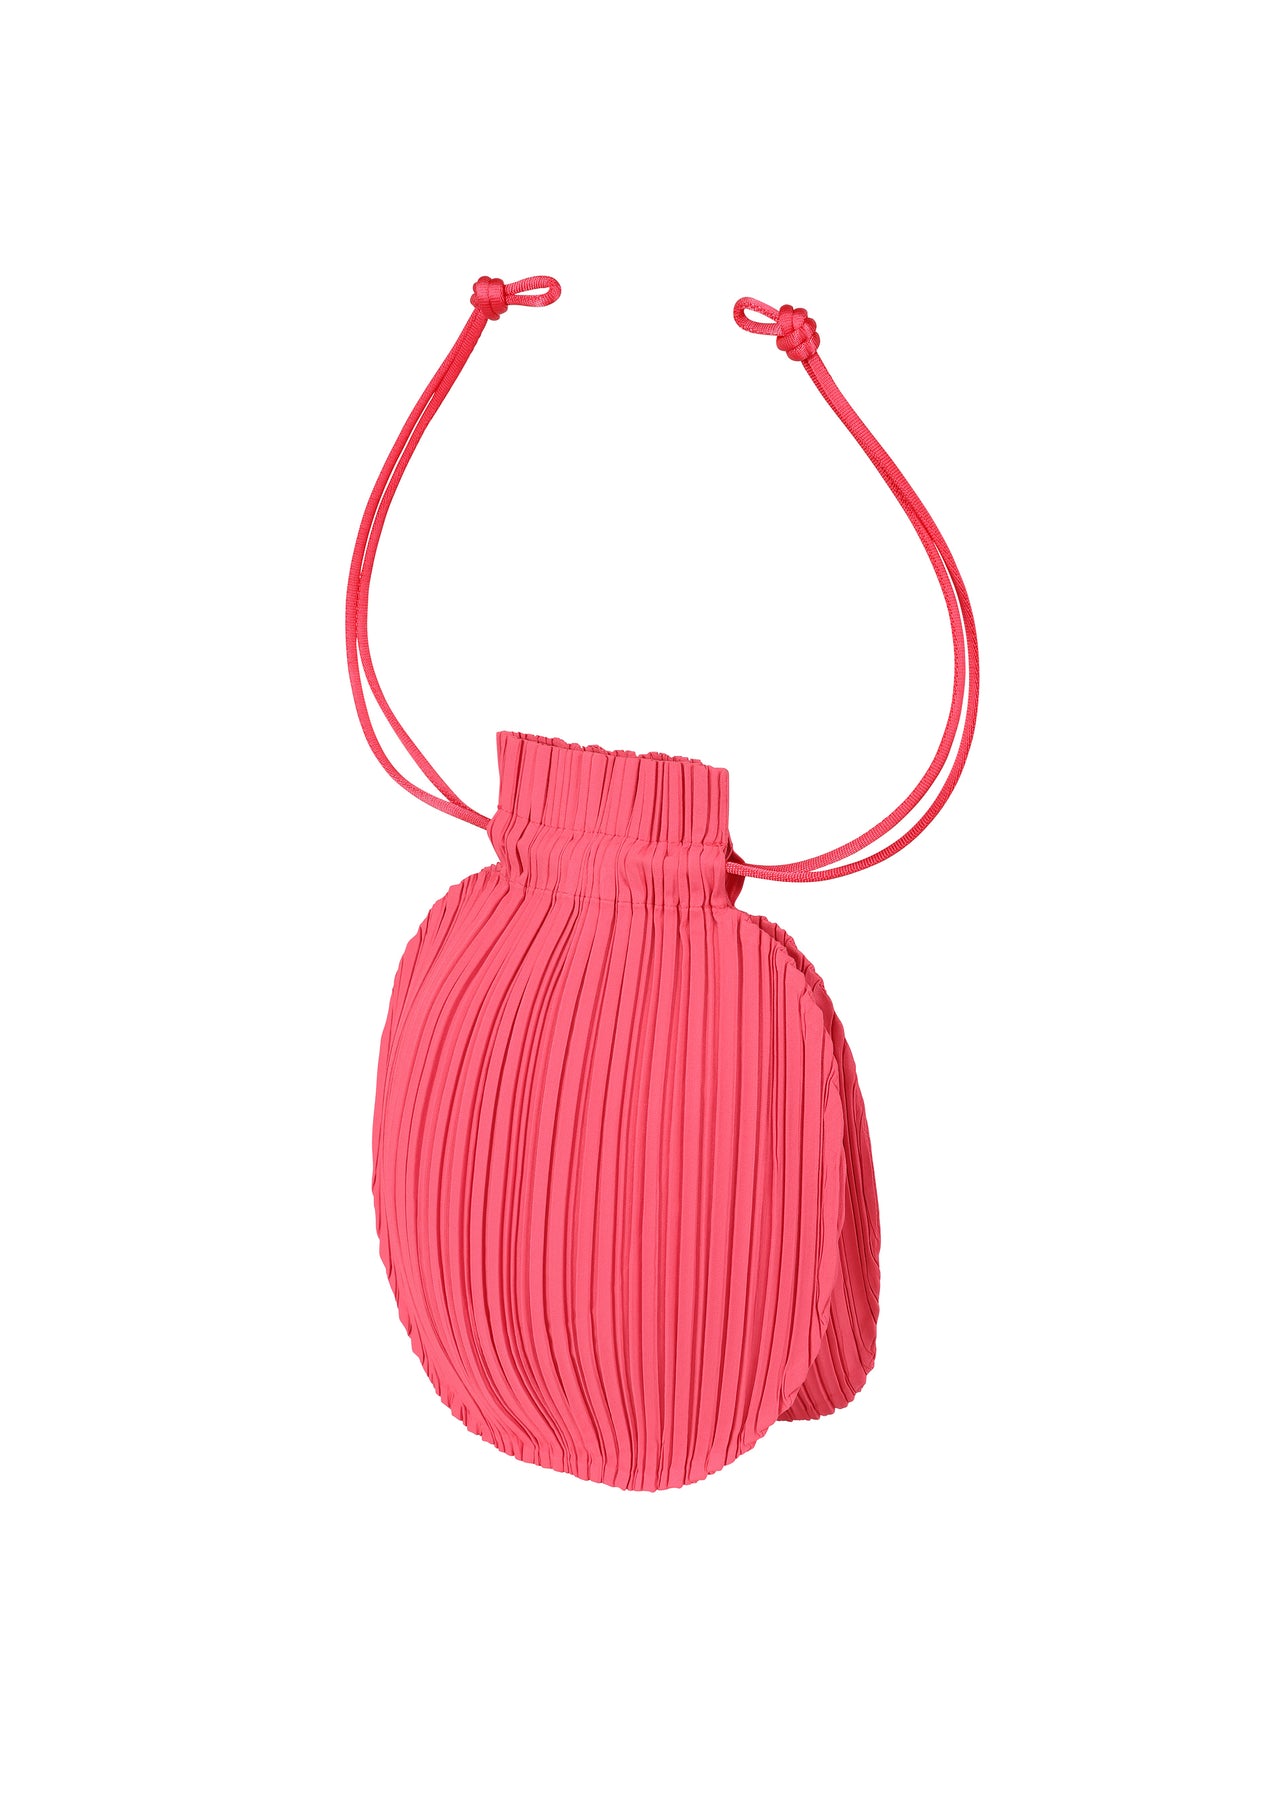 COCONUT PLEATS BAG  The official ISSEY MIYAKE ONLINE STORE